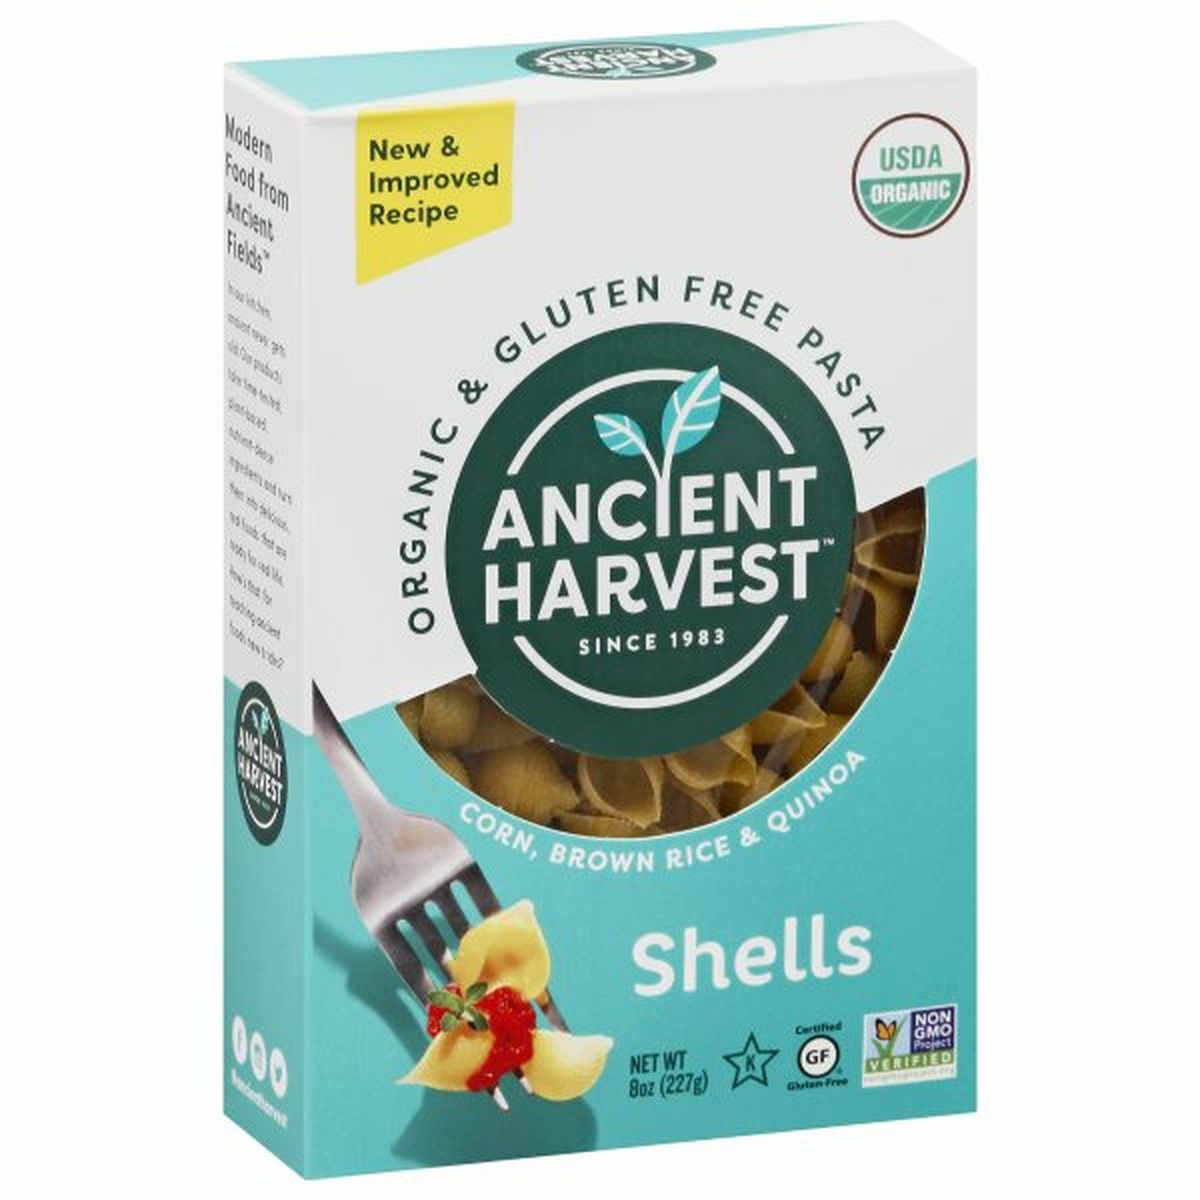 Calories in Ancient Harvest Shells